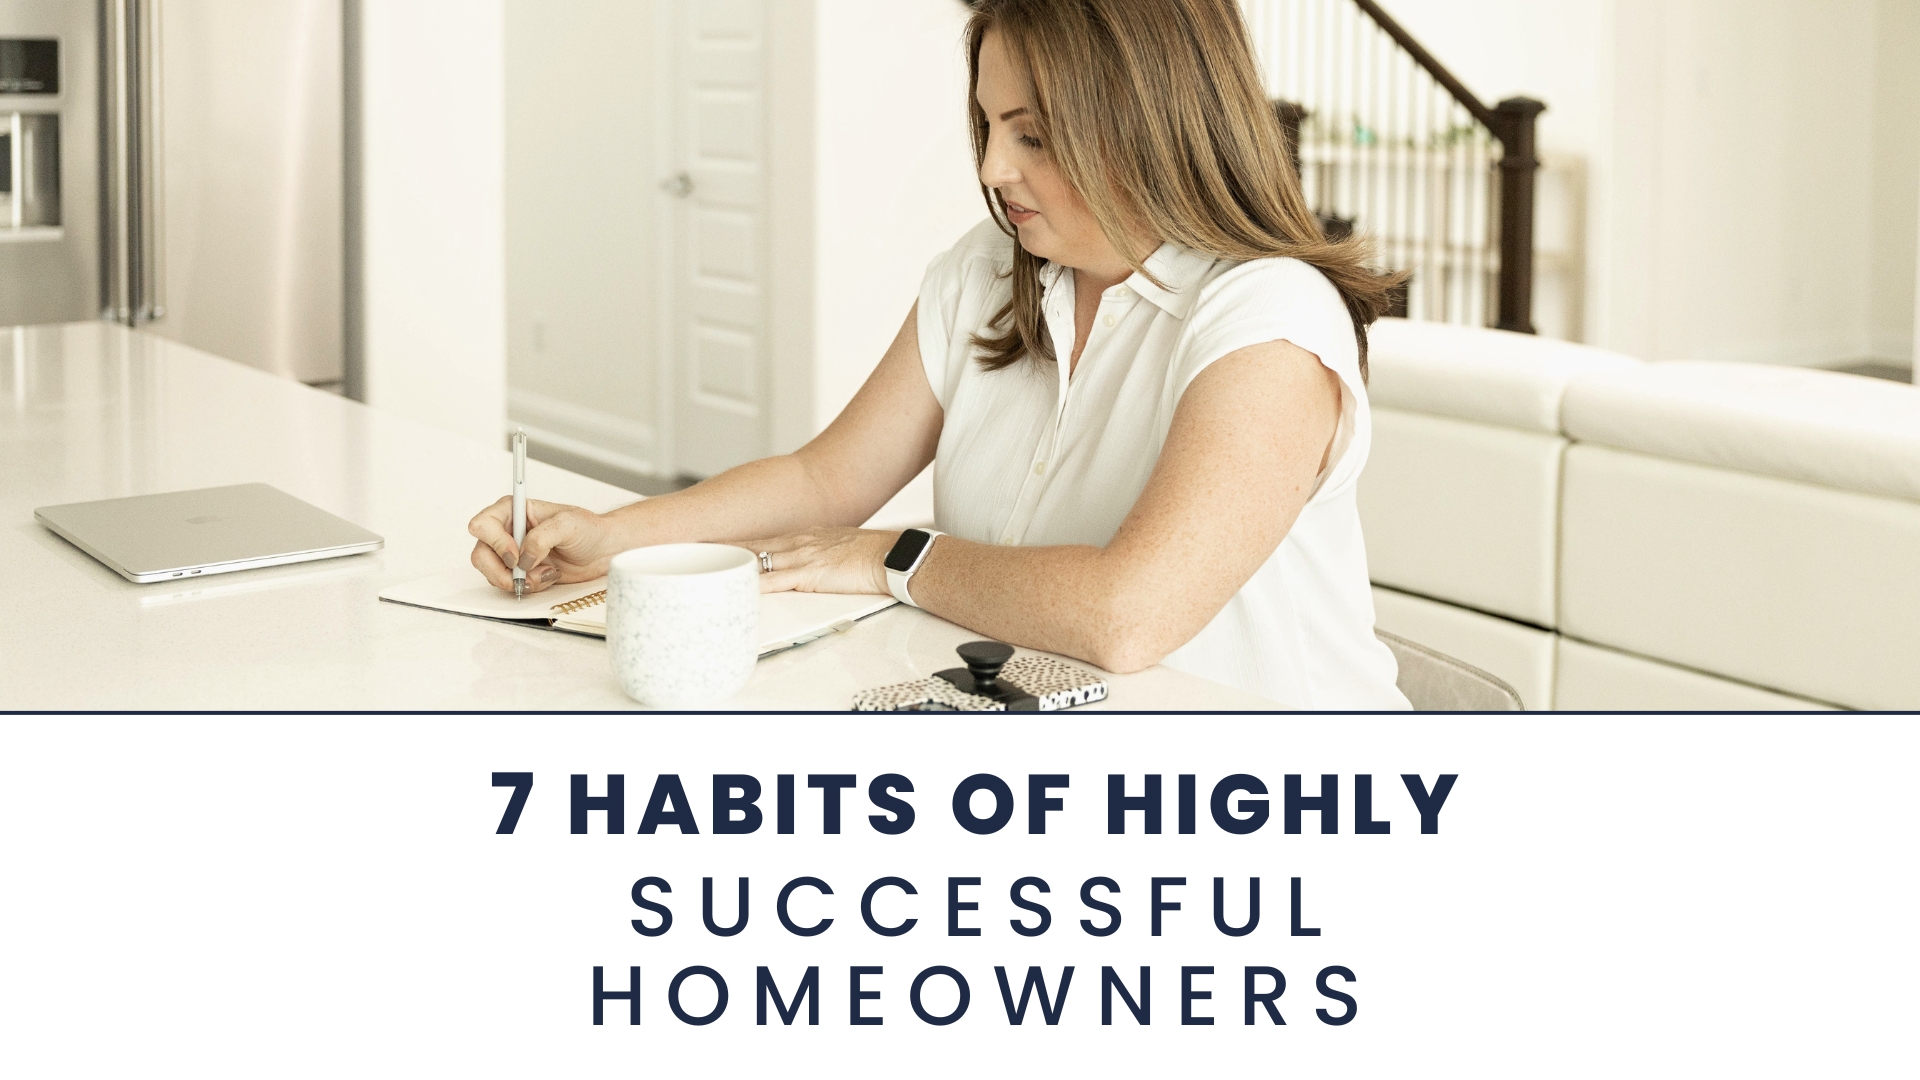 7 Habits of Successful Homeowners